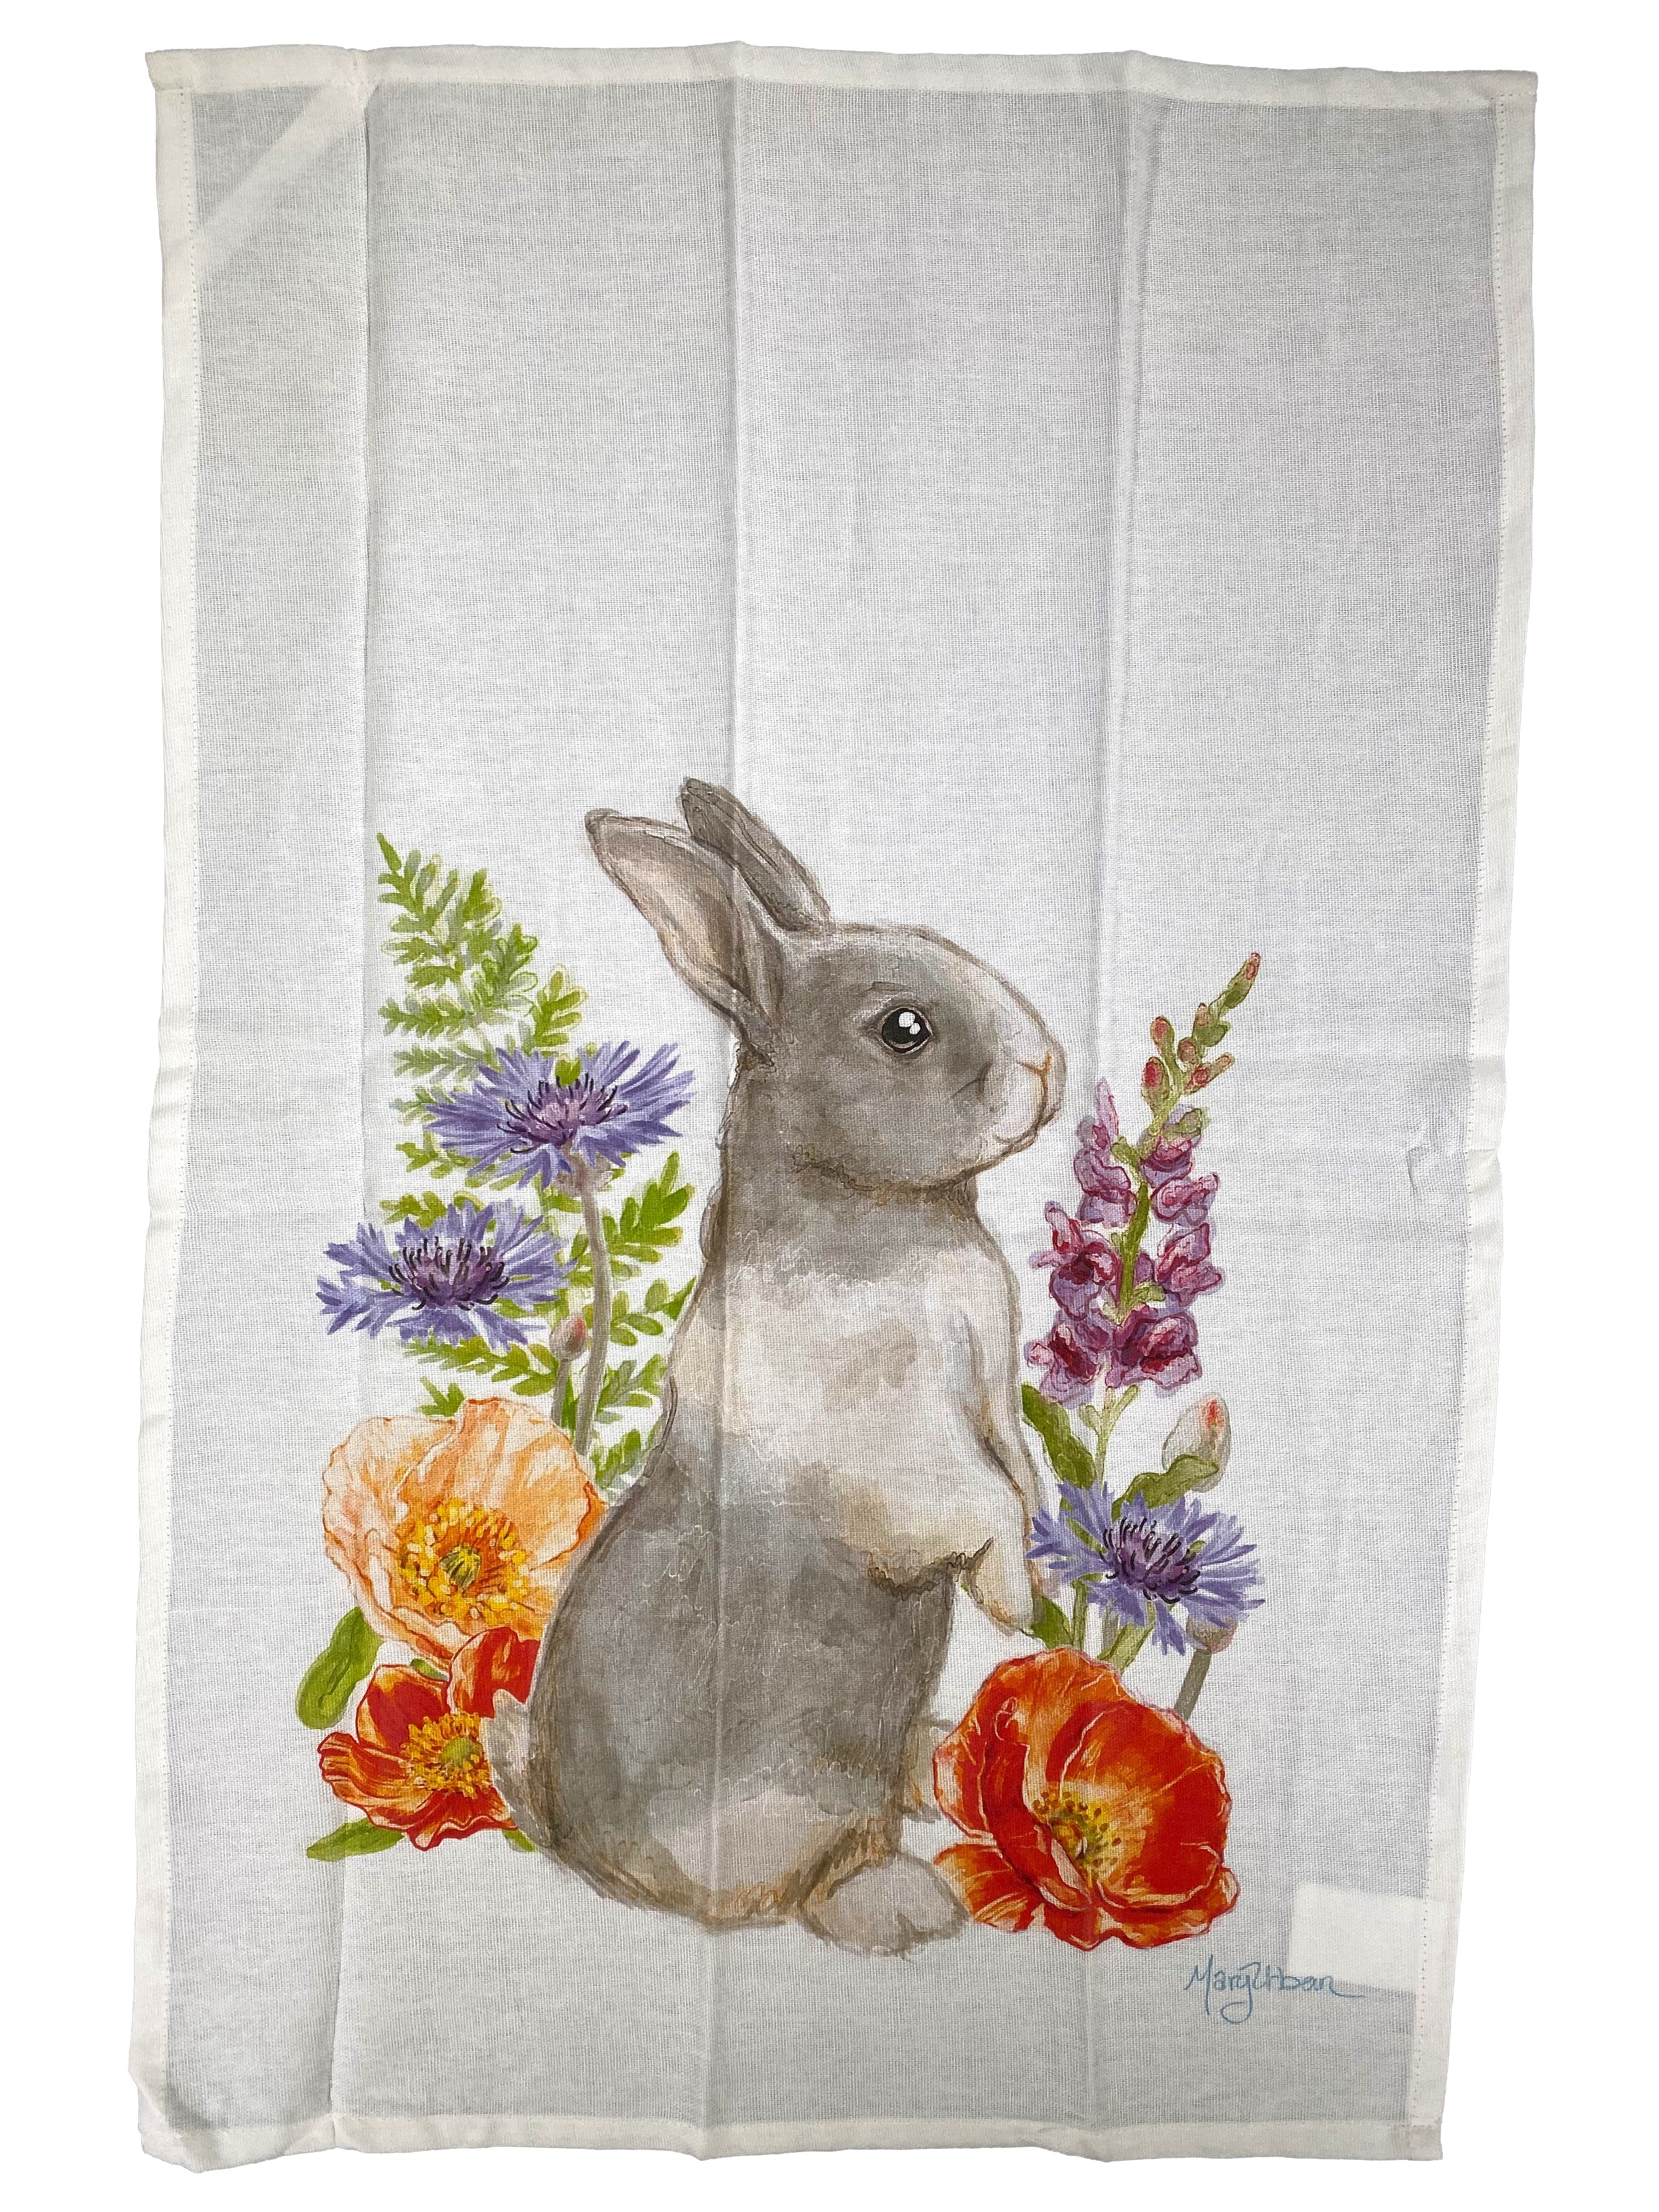 Bunny In Flowers - Printed Kitchen Towel    